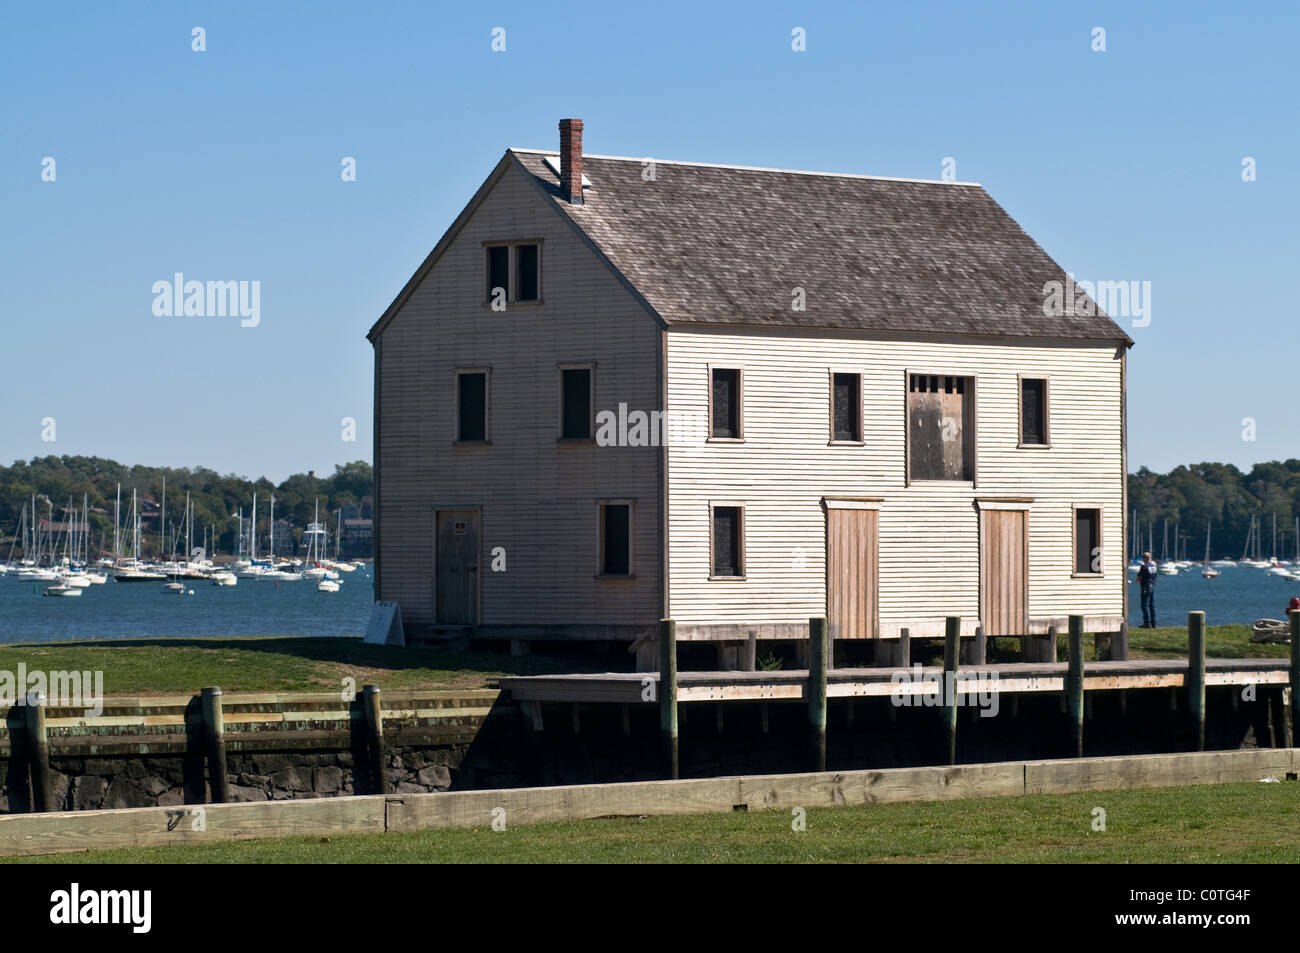 A barn located next to the water in Salem, MA. Stock Photo